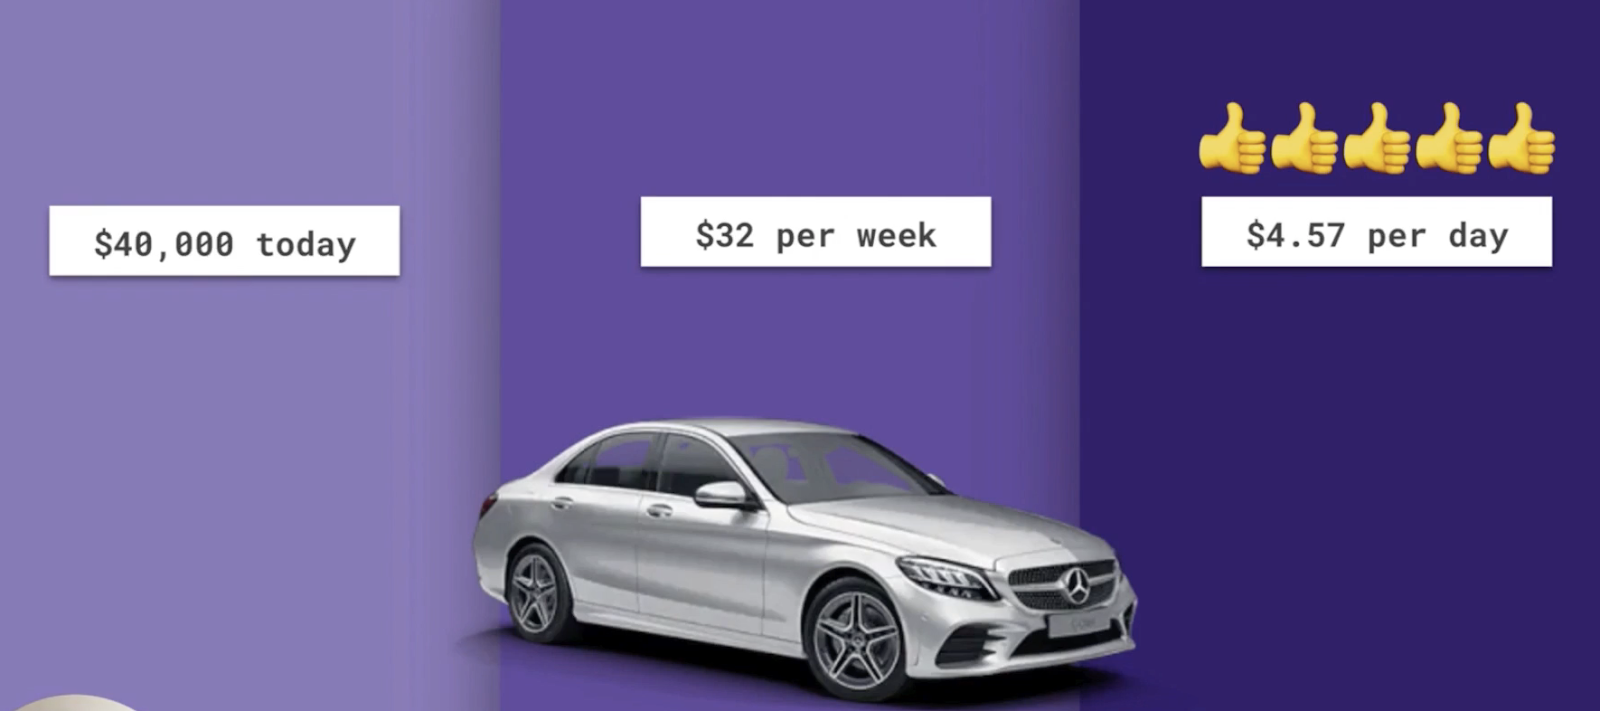 Following research, users found the idea of paying $4.57 a day for the Mercedes Benz preferable than $32 per week, or $40,000 in one hit.